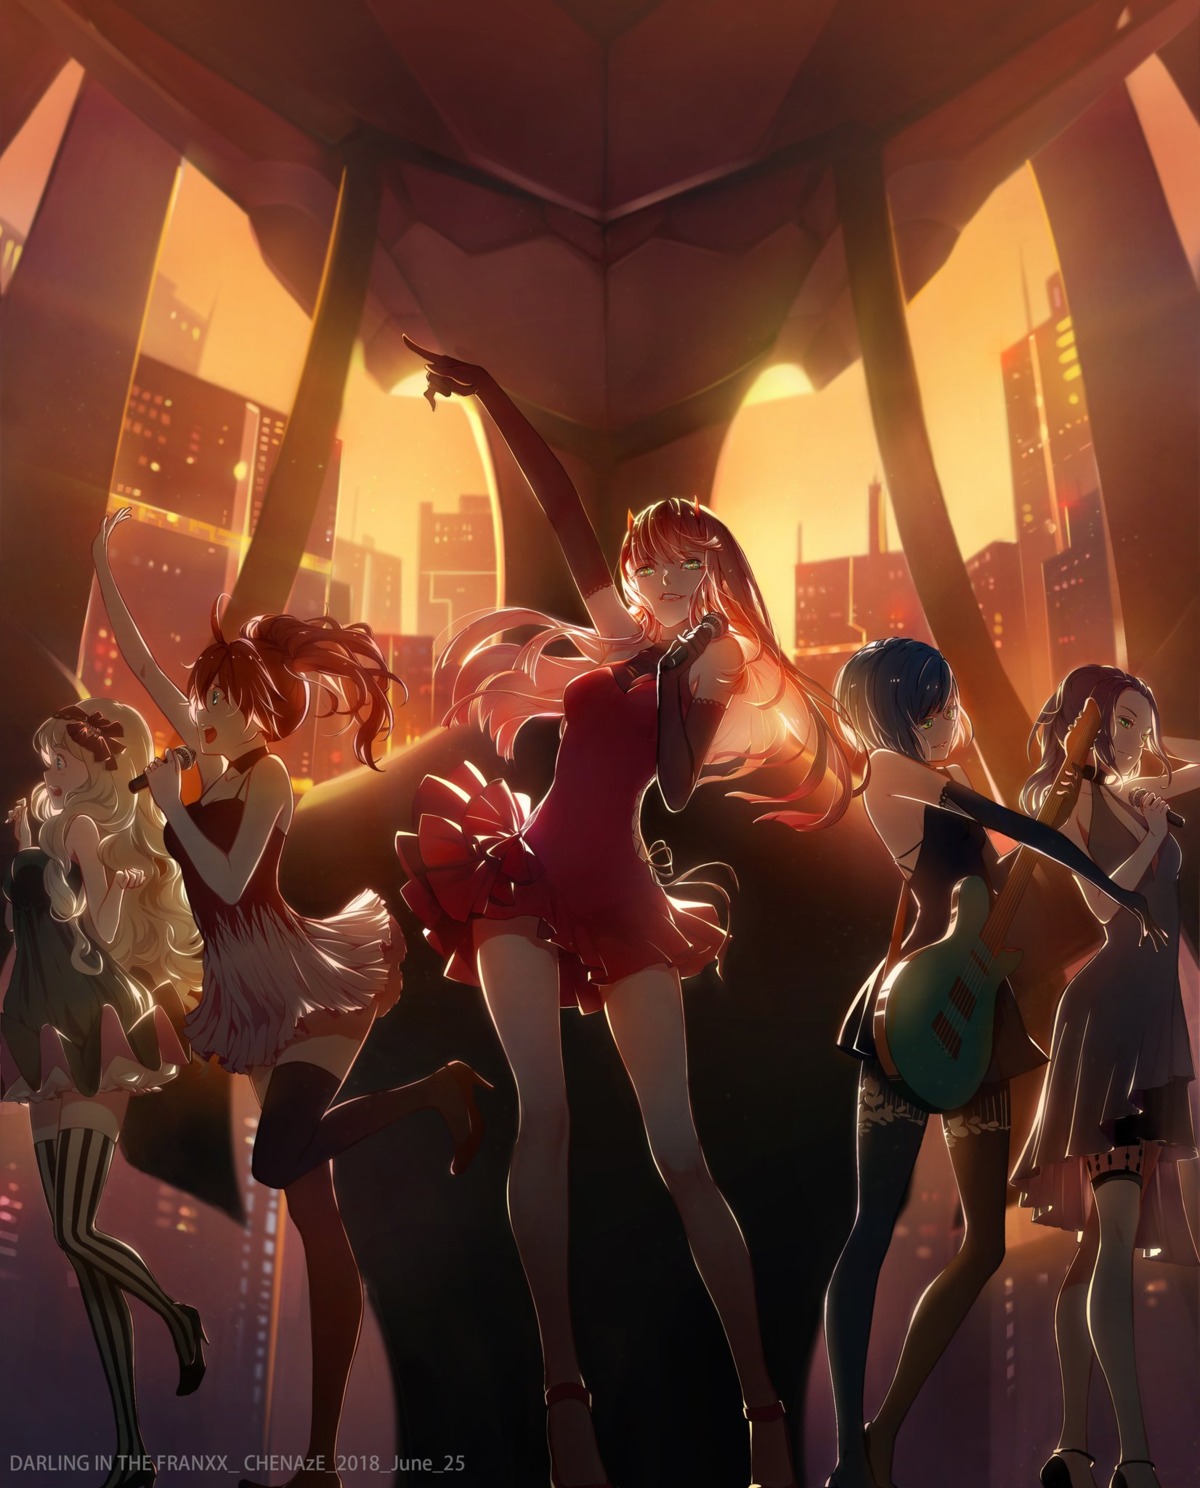 chenaze57 cleavage darling_in_the_franxx dress guitar heels horns ichigo_(darling_in_the_franxx) ikuno_(darling_in_the_franxx) kokoro_(darling_in_the_franxx) miku_(darling_in_the_franxx) strelizia thighhighs zero_two_(darling_in_the_franxx)